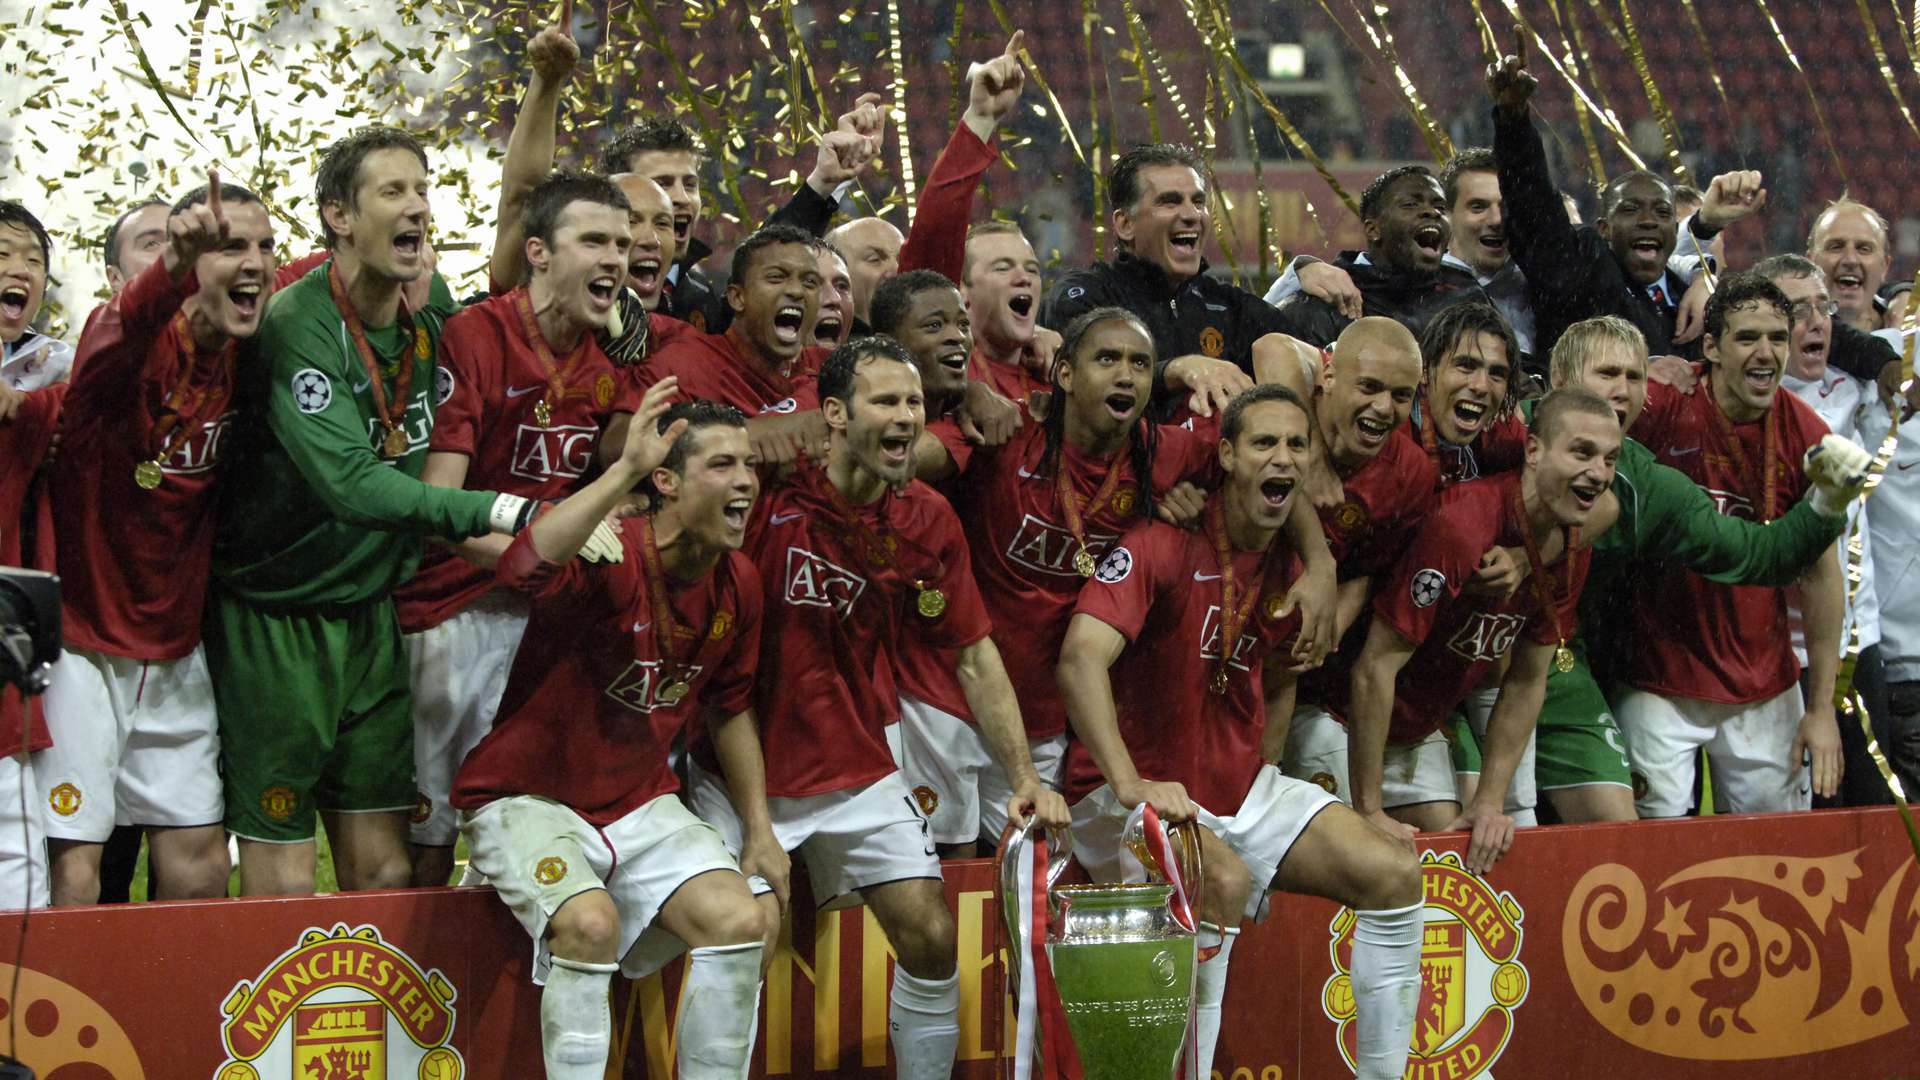 Gallery Champions League Final 08 Manchester United